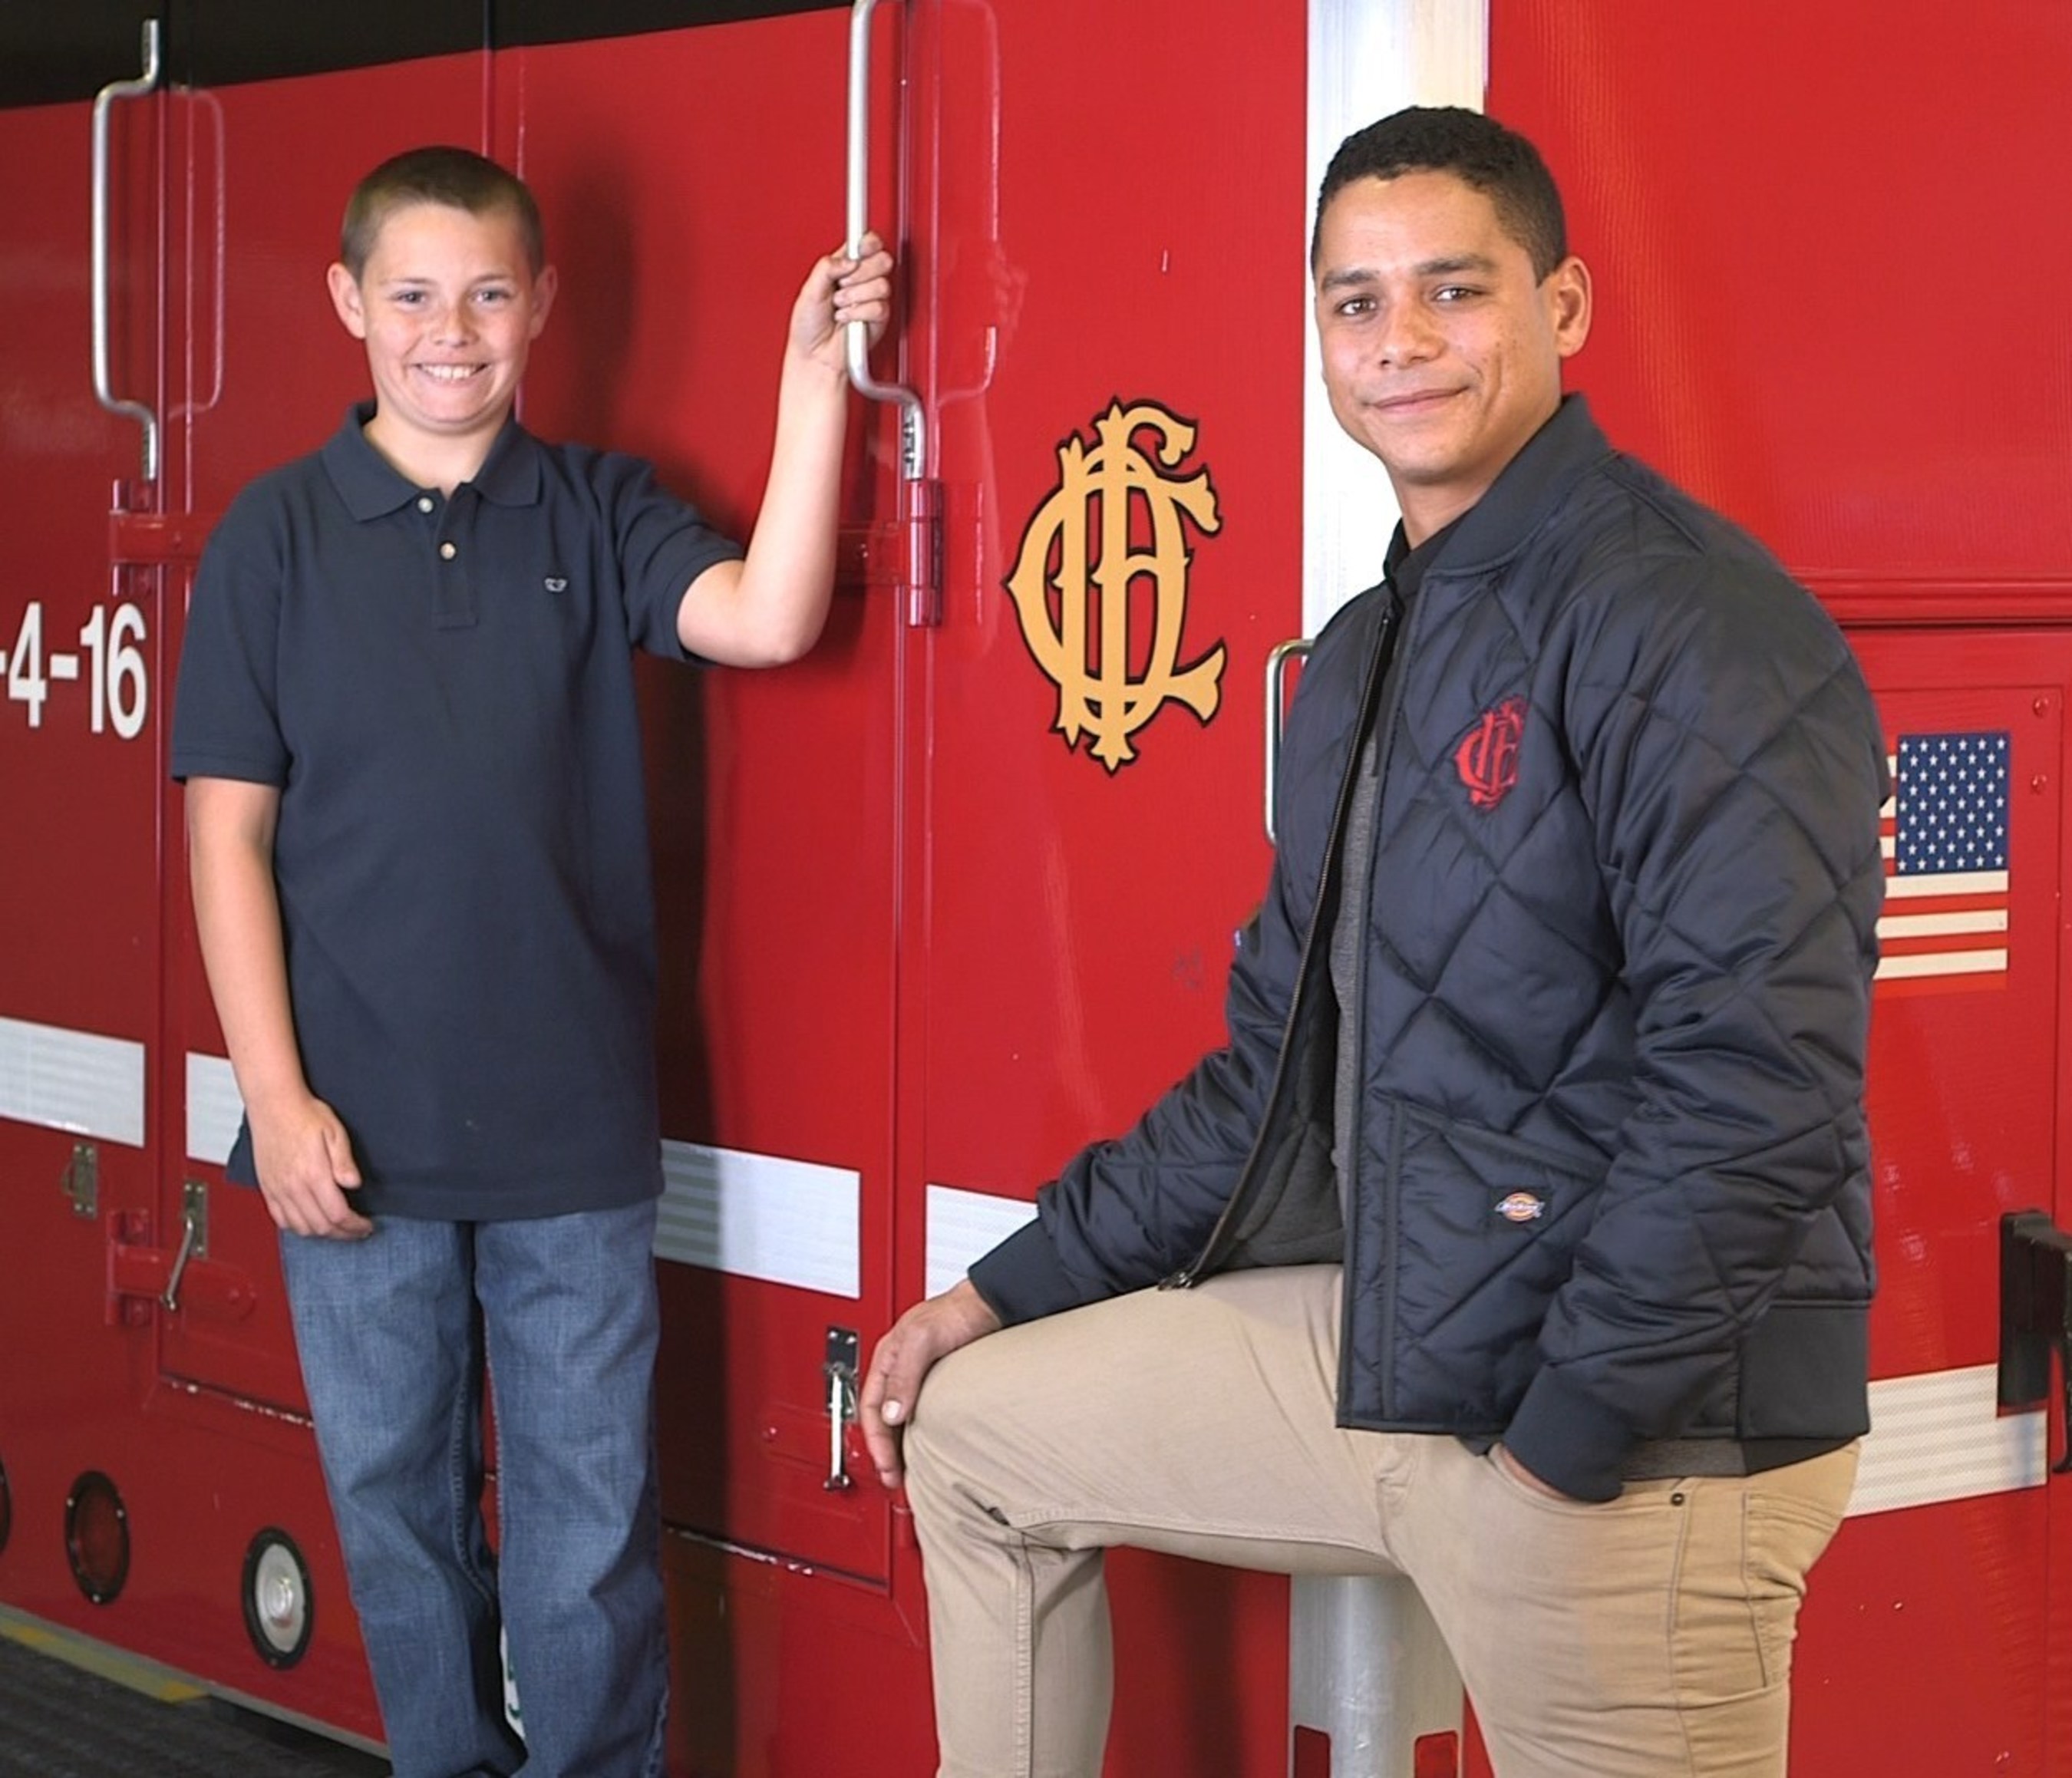 Charlie Barnett of NBC's Chicago Fire teams with Shriners Hospitals for Children and their patient Ollie to reduce the risks of house fires and burn injuries this holiday season.